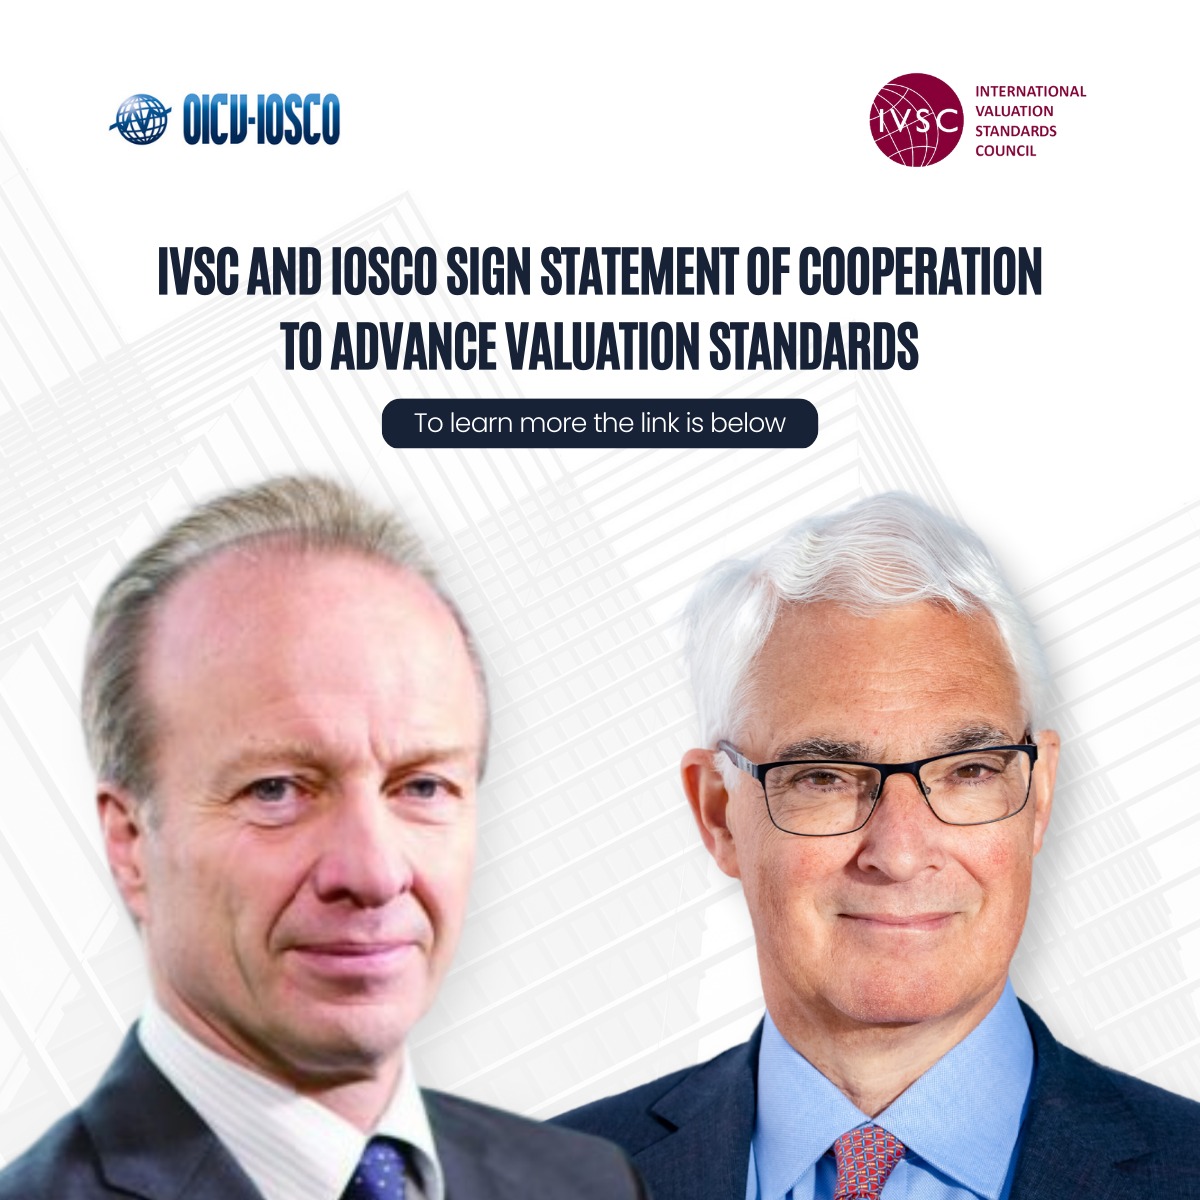 IVSC and IOSCO's Newly Signed Statement of Cooperation